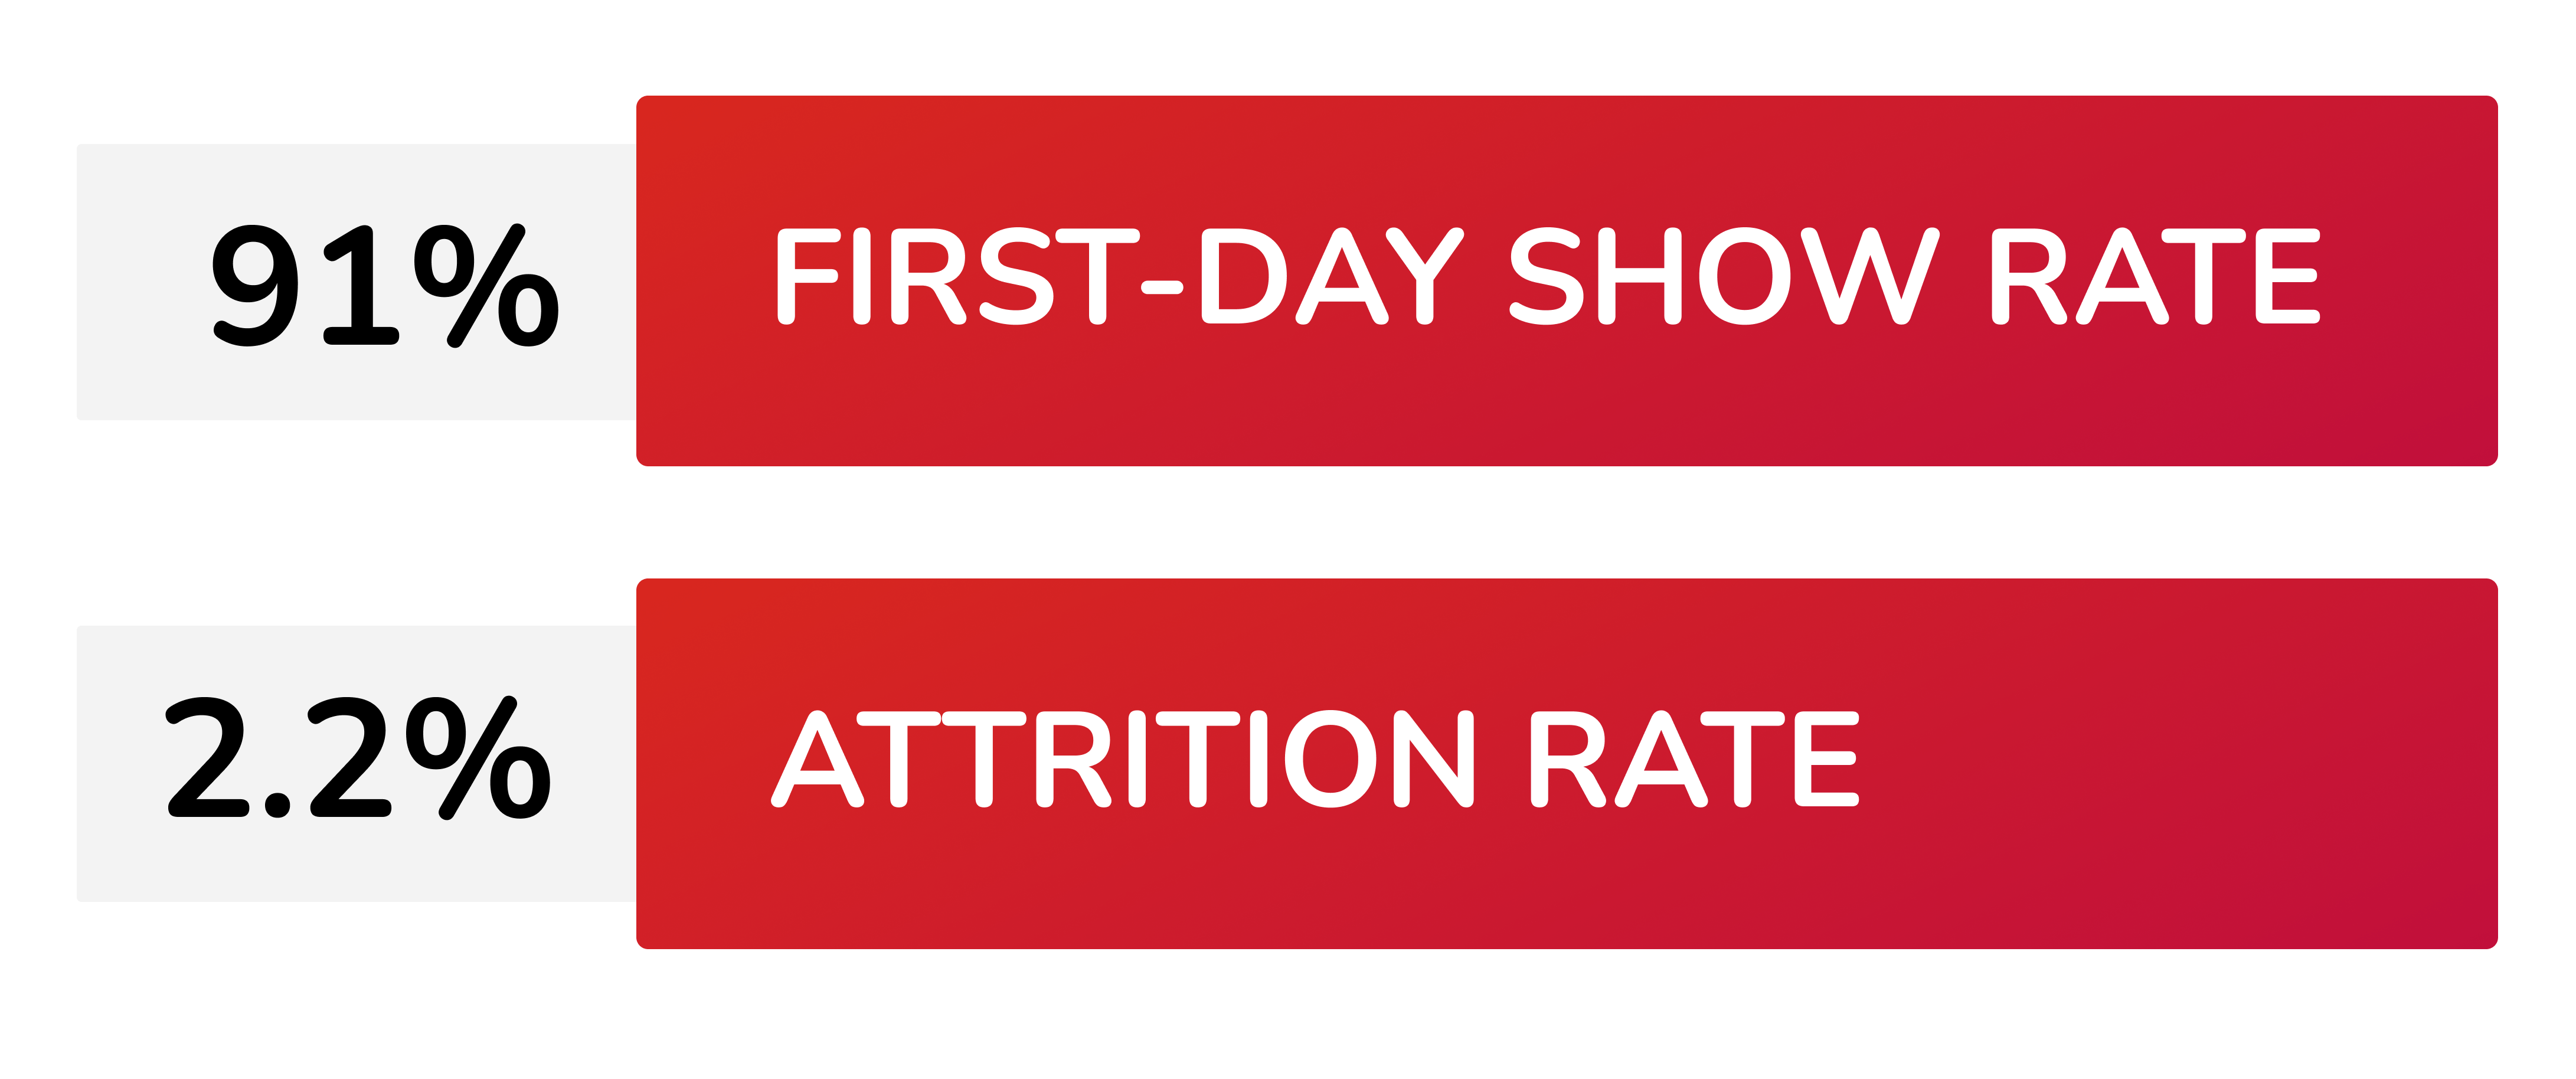 91% first-day show rate, 2.2% attrition rate